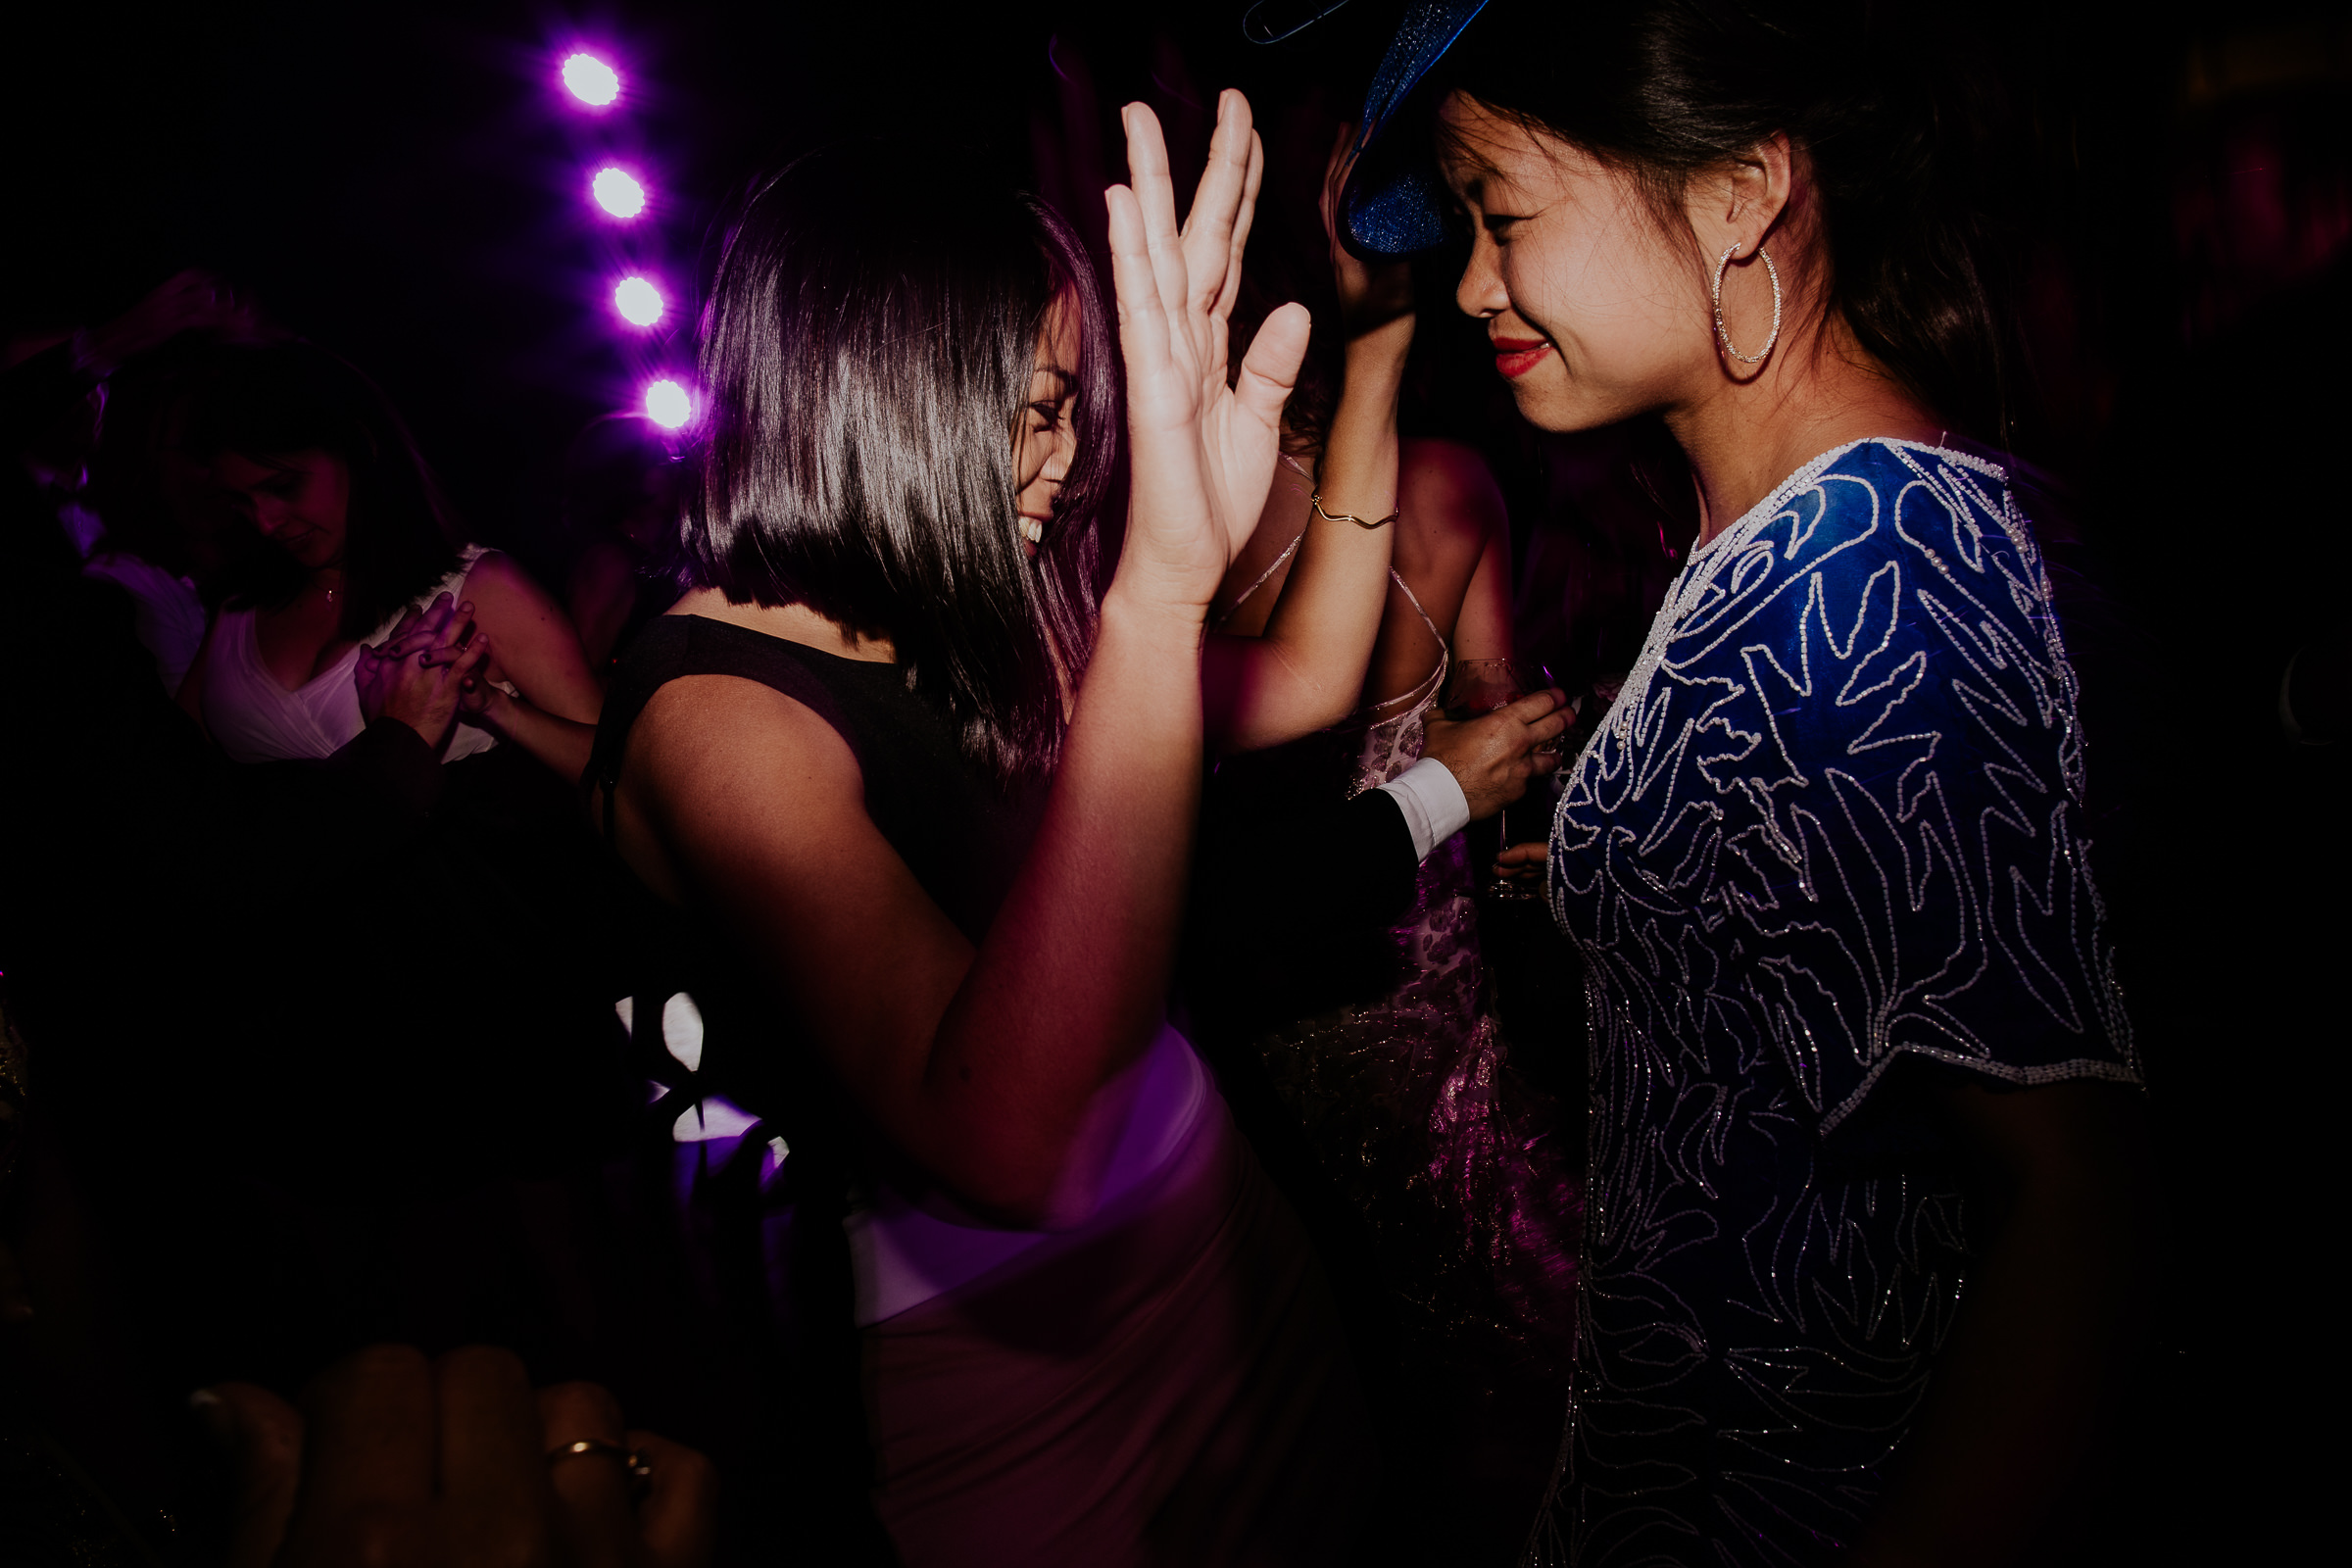 two women dancing at a wedding party